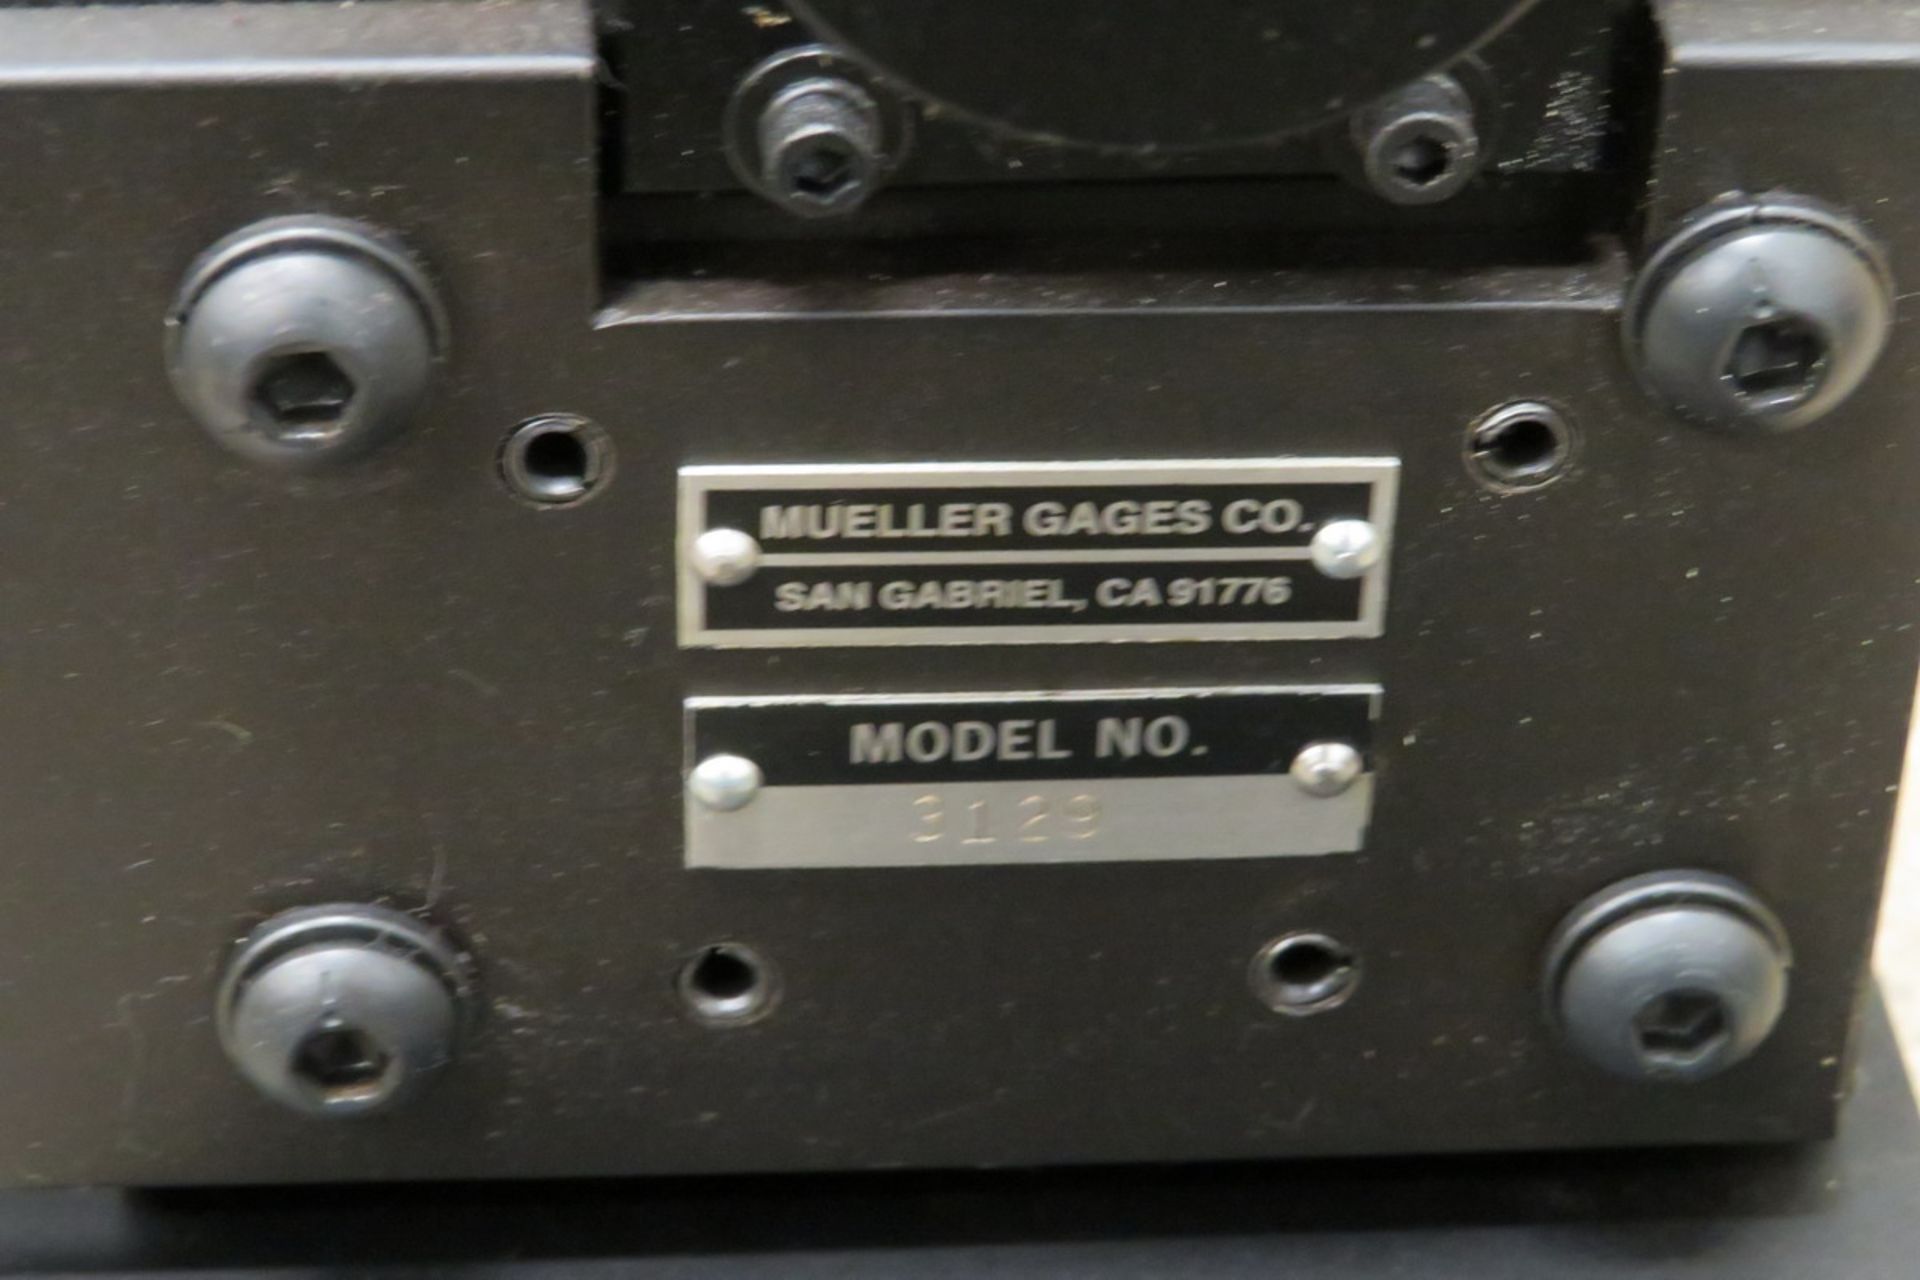 Mueller Gage 3129 48"-60" Beam Gage Reference Master - Image 4 of 4